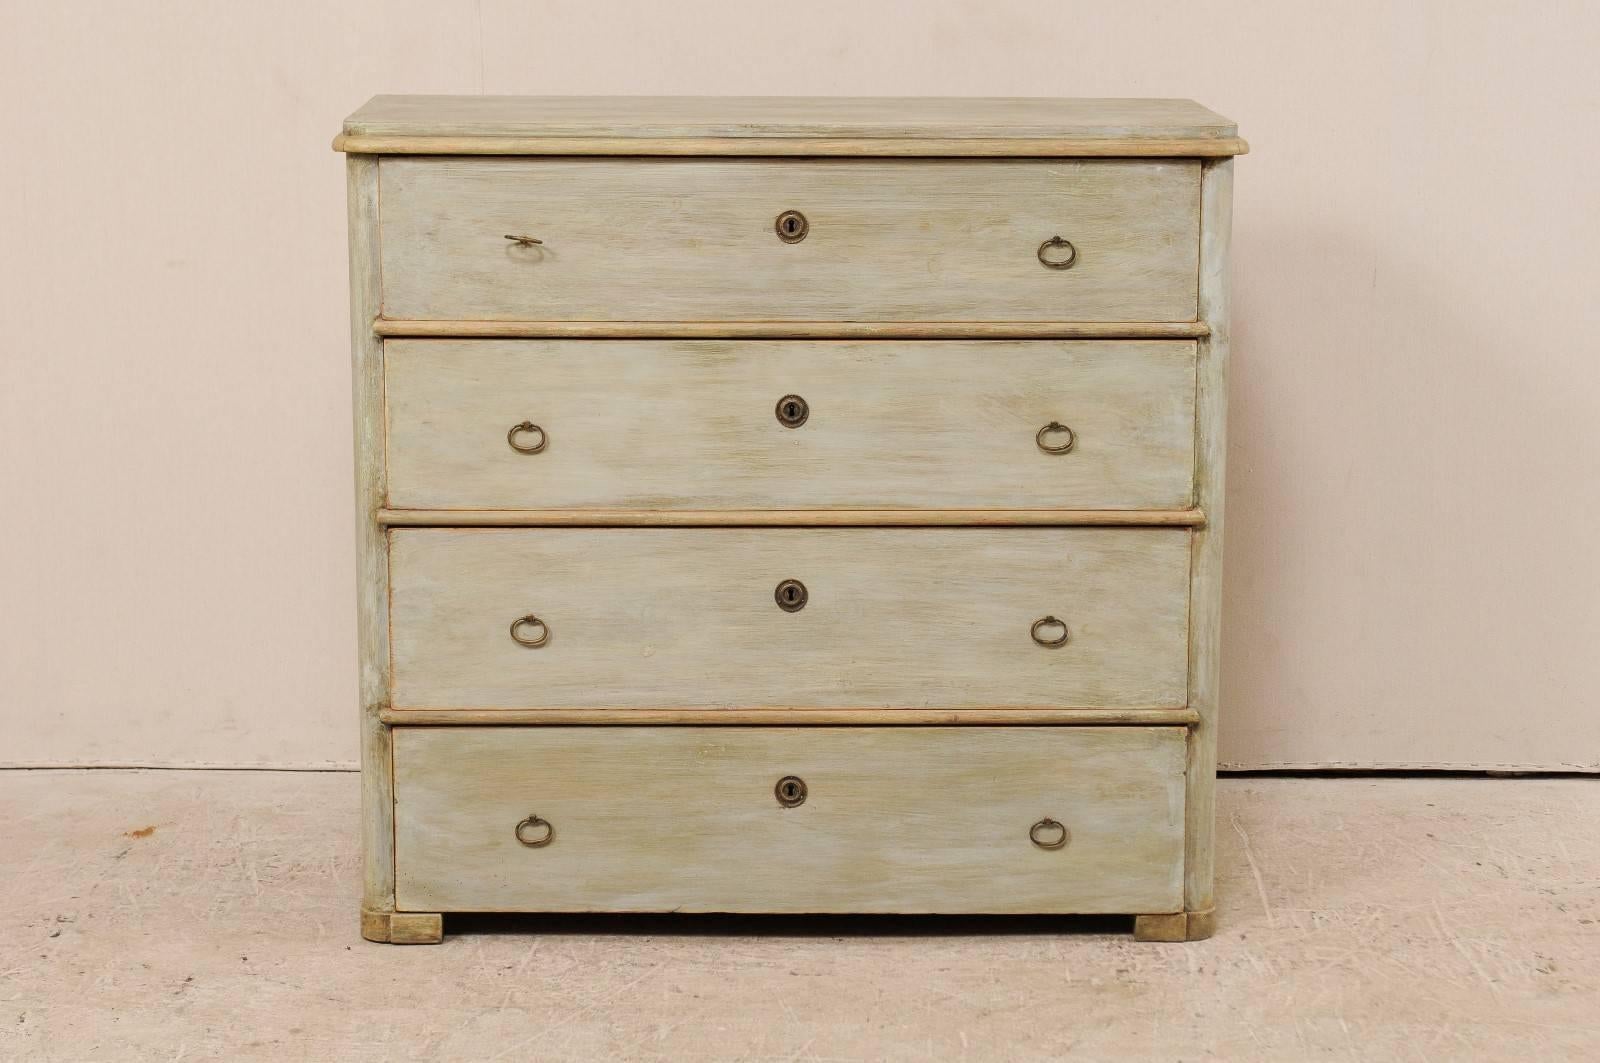 A Swedish 19th century painted wood four-drawer Karl Johan chest, circa 1840-1850. This antique Swedish chest features nice cleans, a raised top with rounded corners and is raised on wrap around feet. There are four dovetailed drawers, each adorn